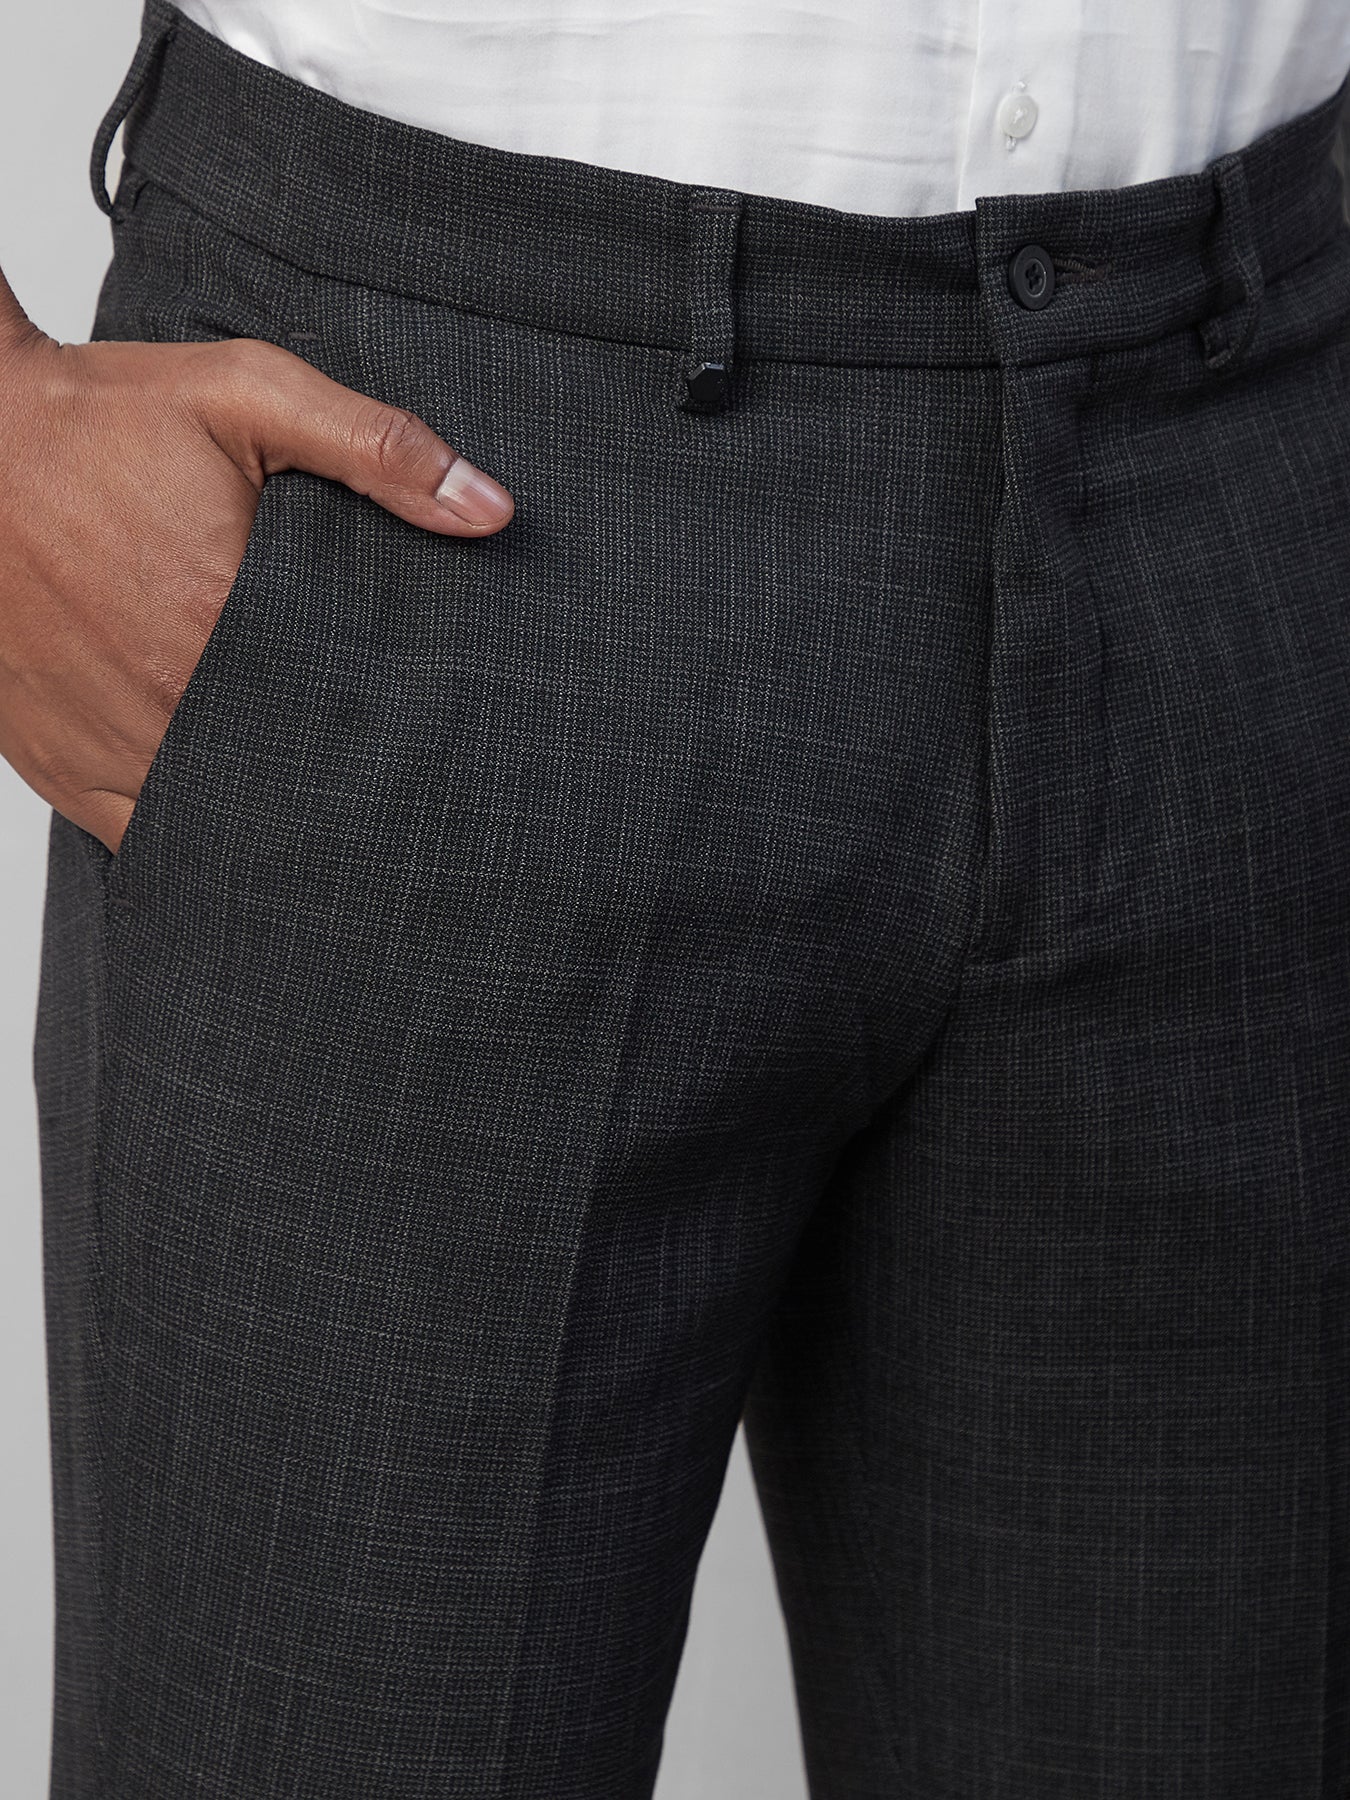 Charcoal Checks All Weather Essential Stretch Pants